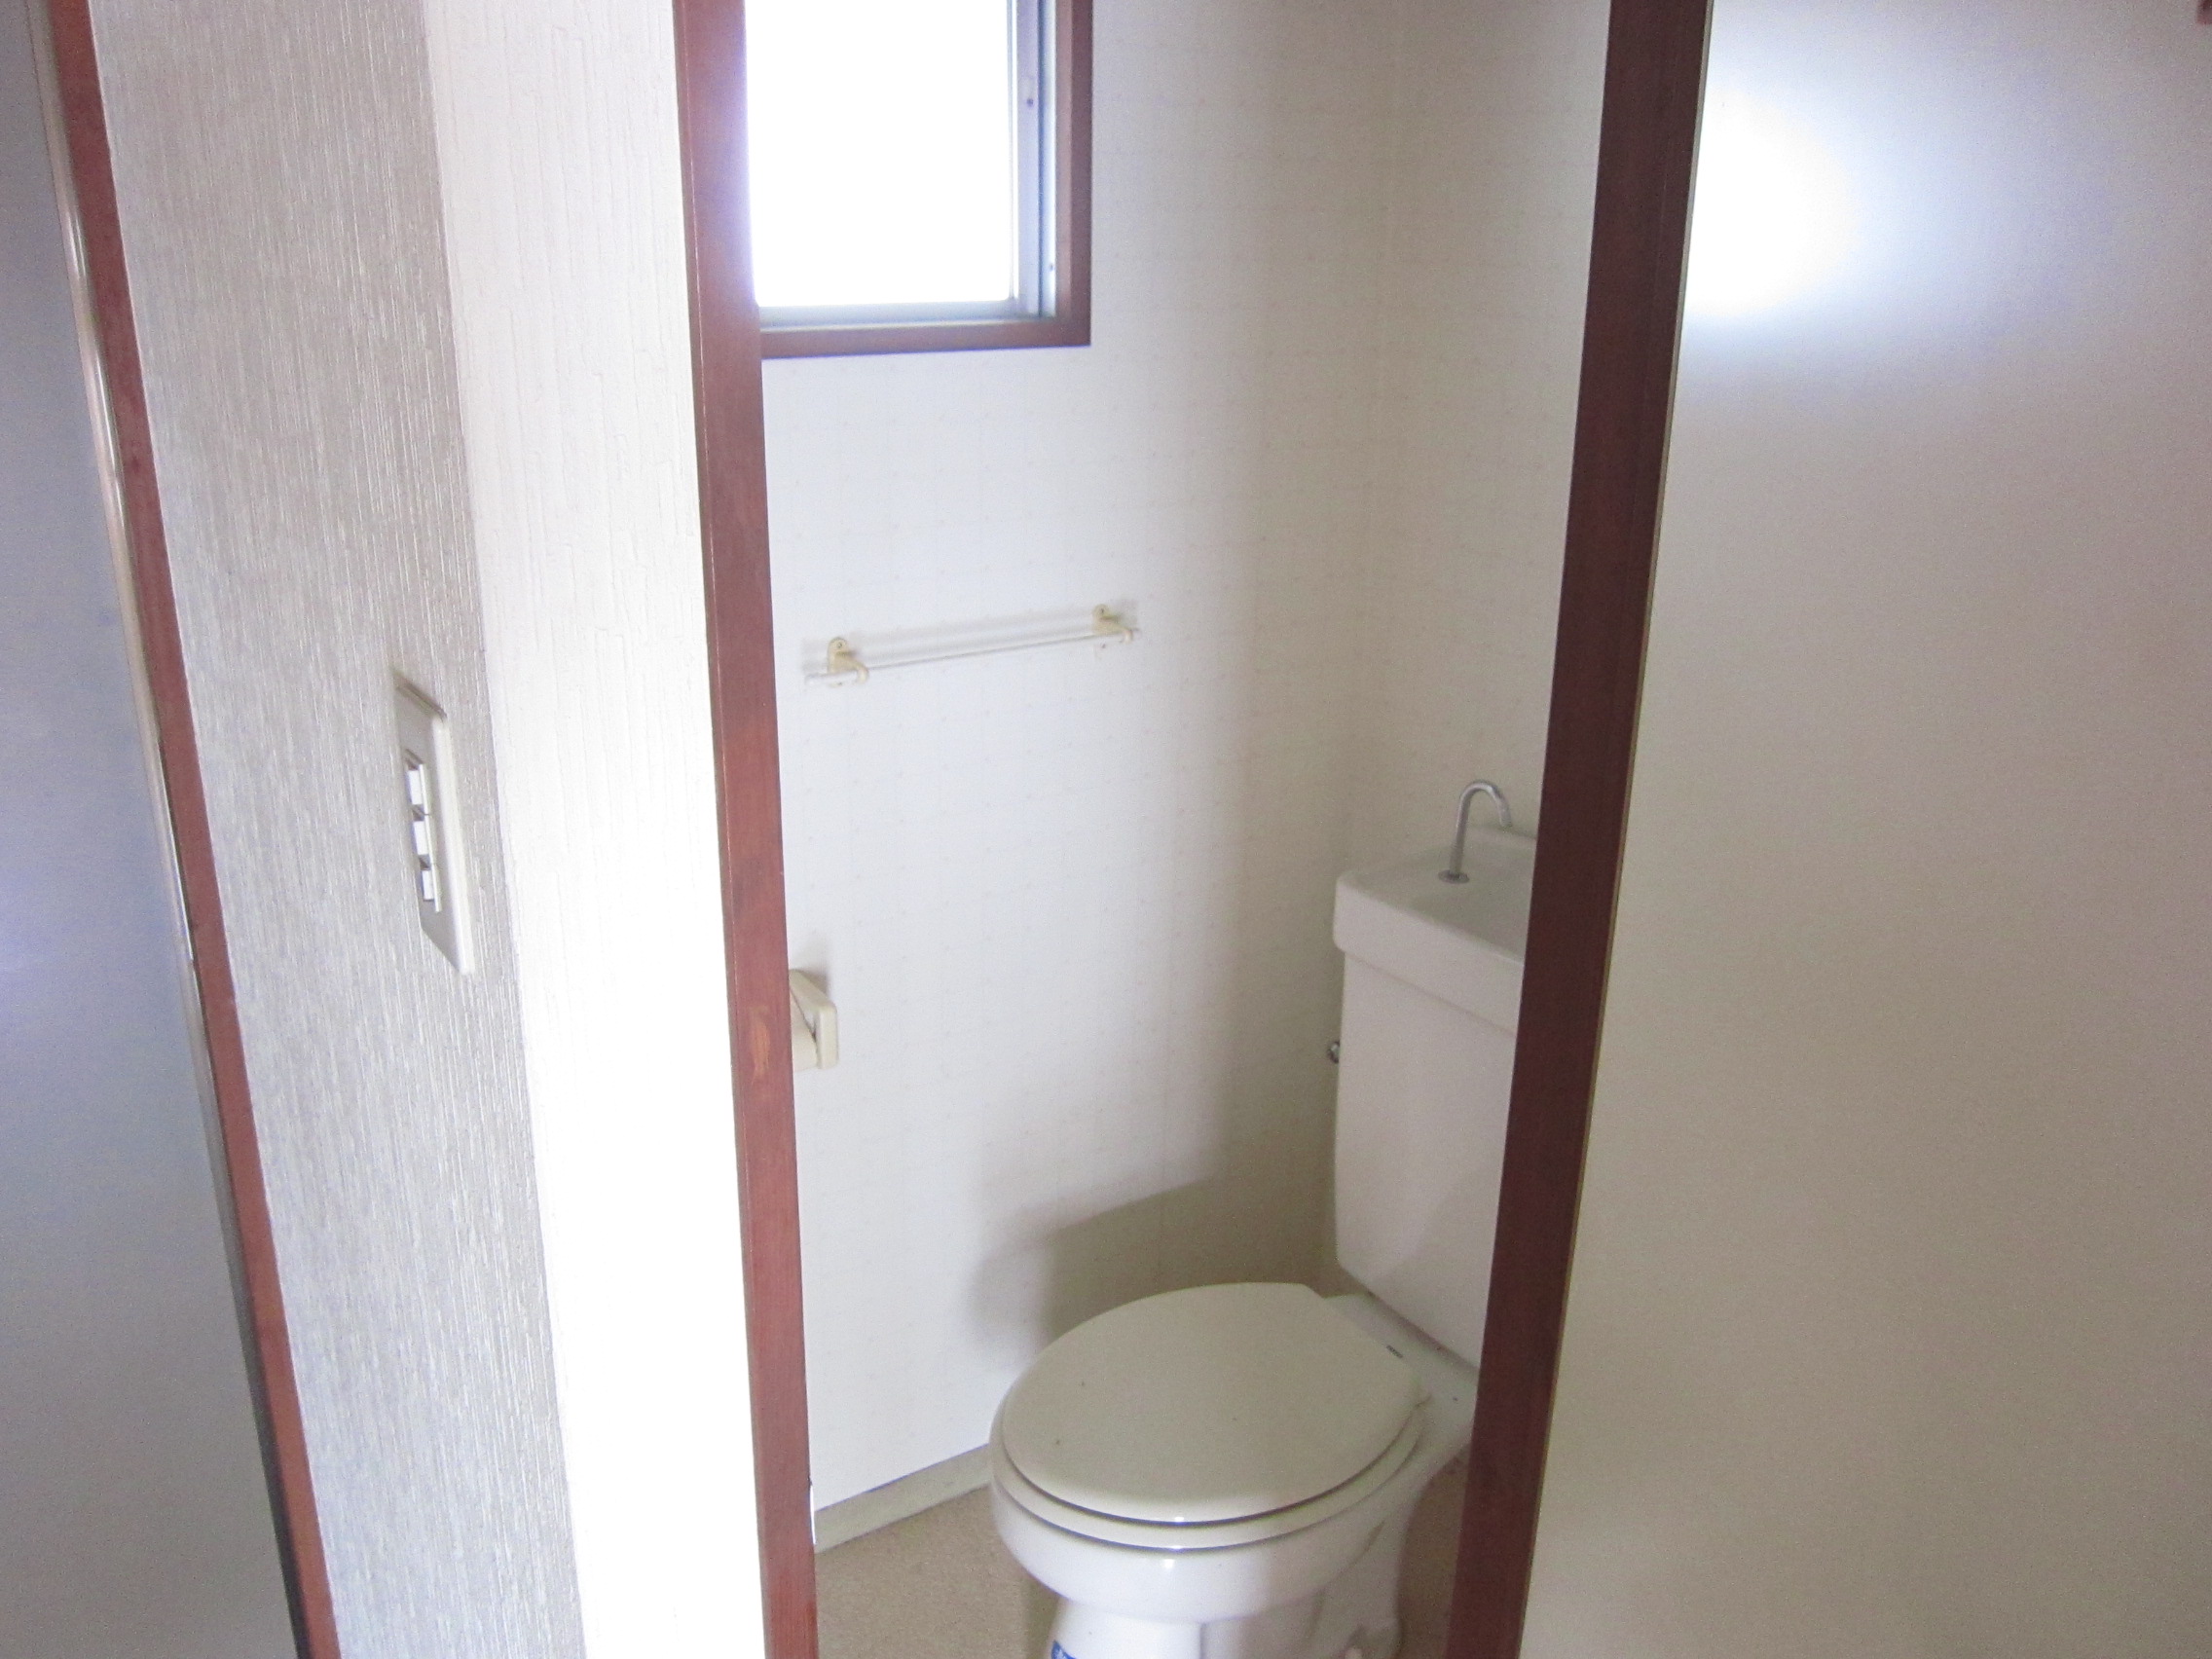 Toilet. It is bright because there is a window!